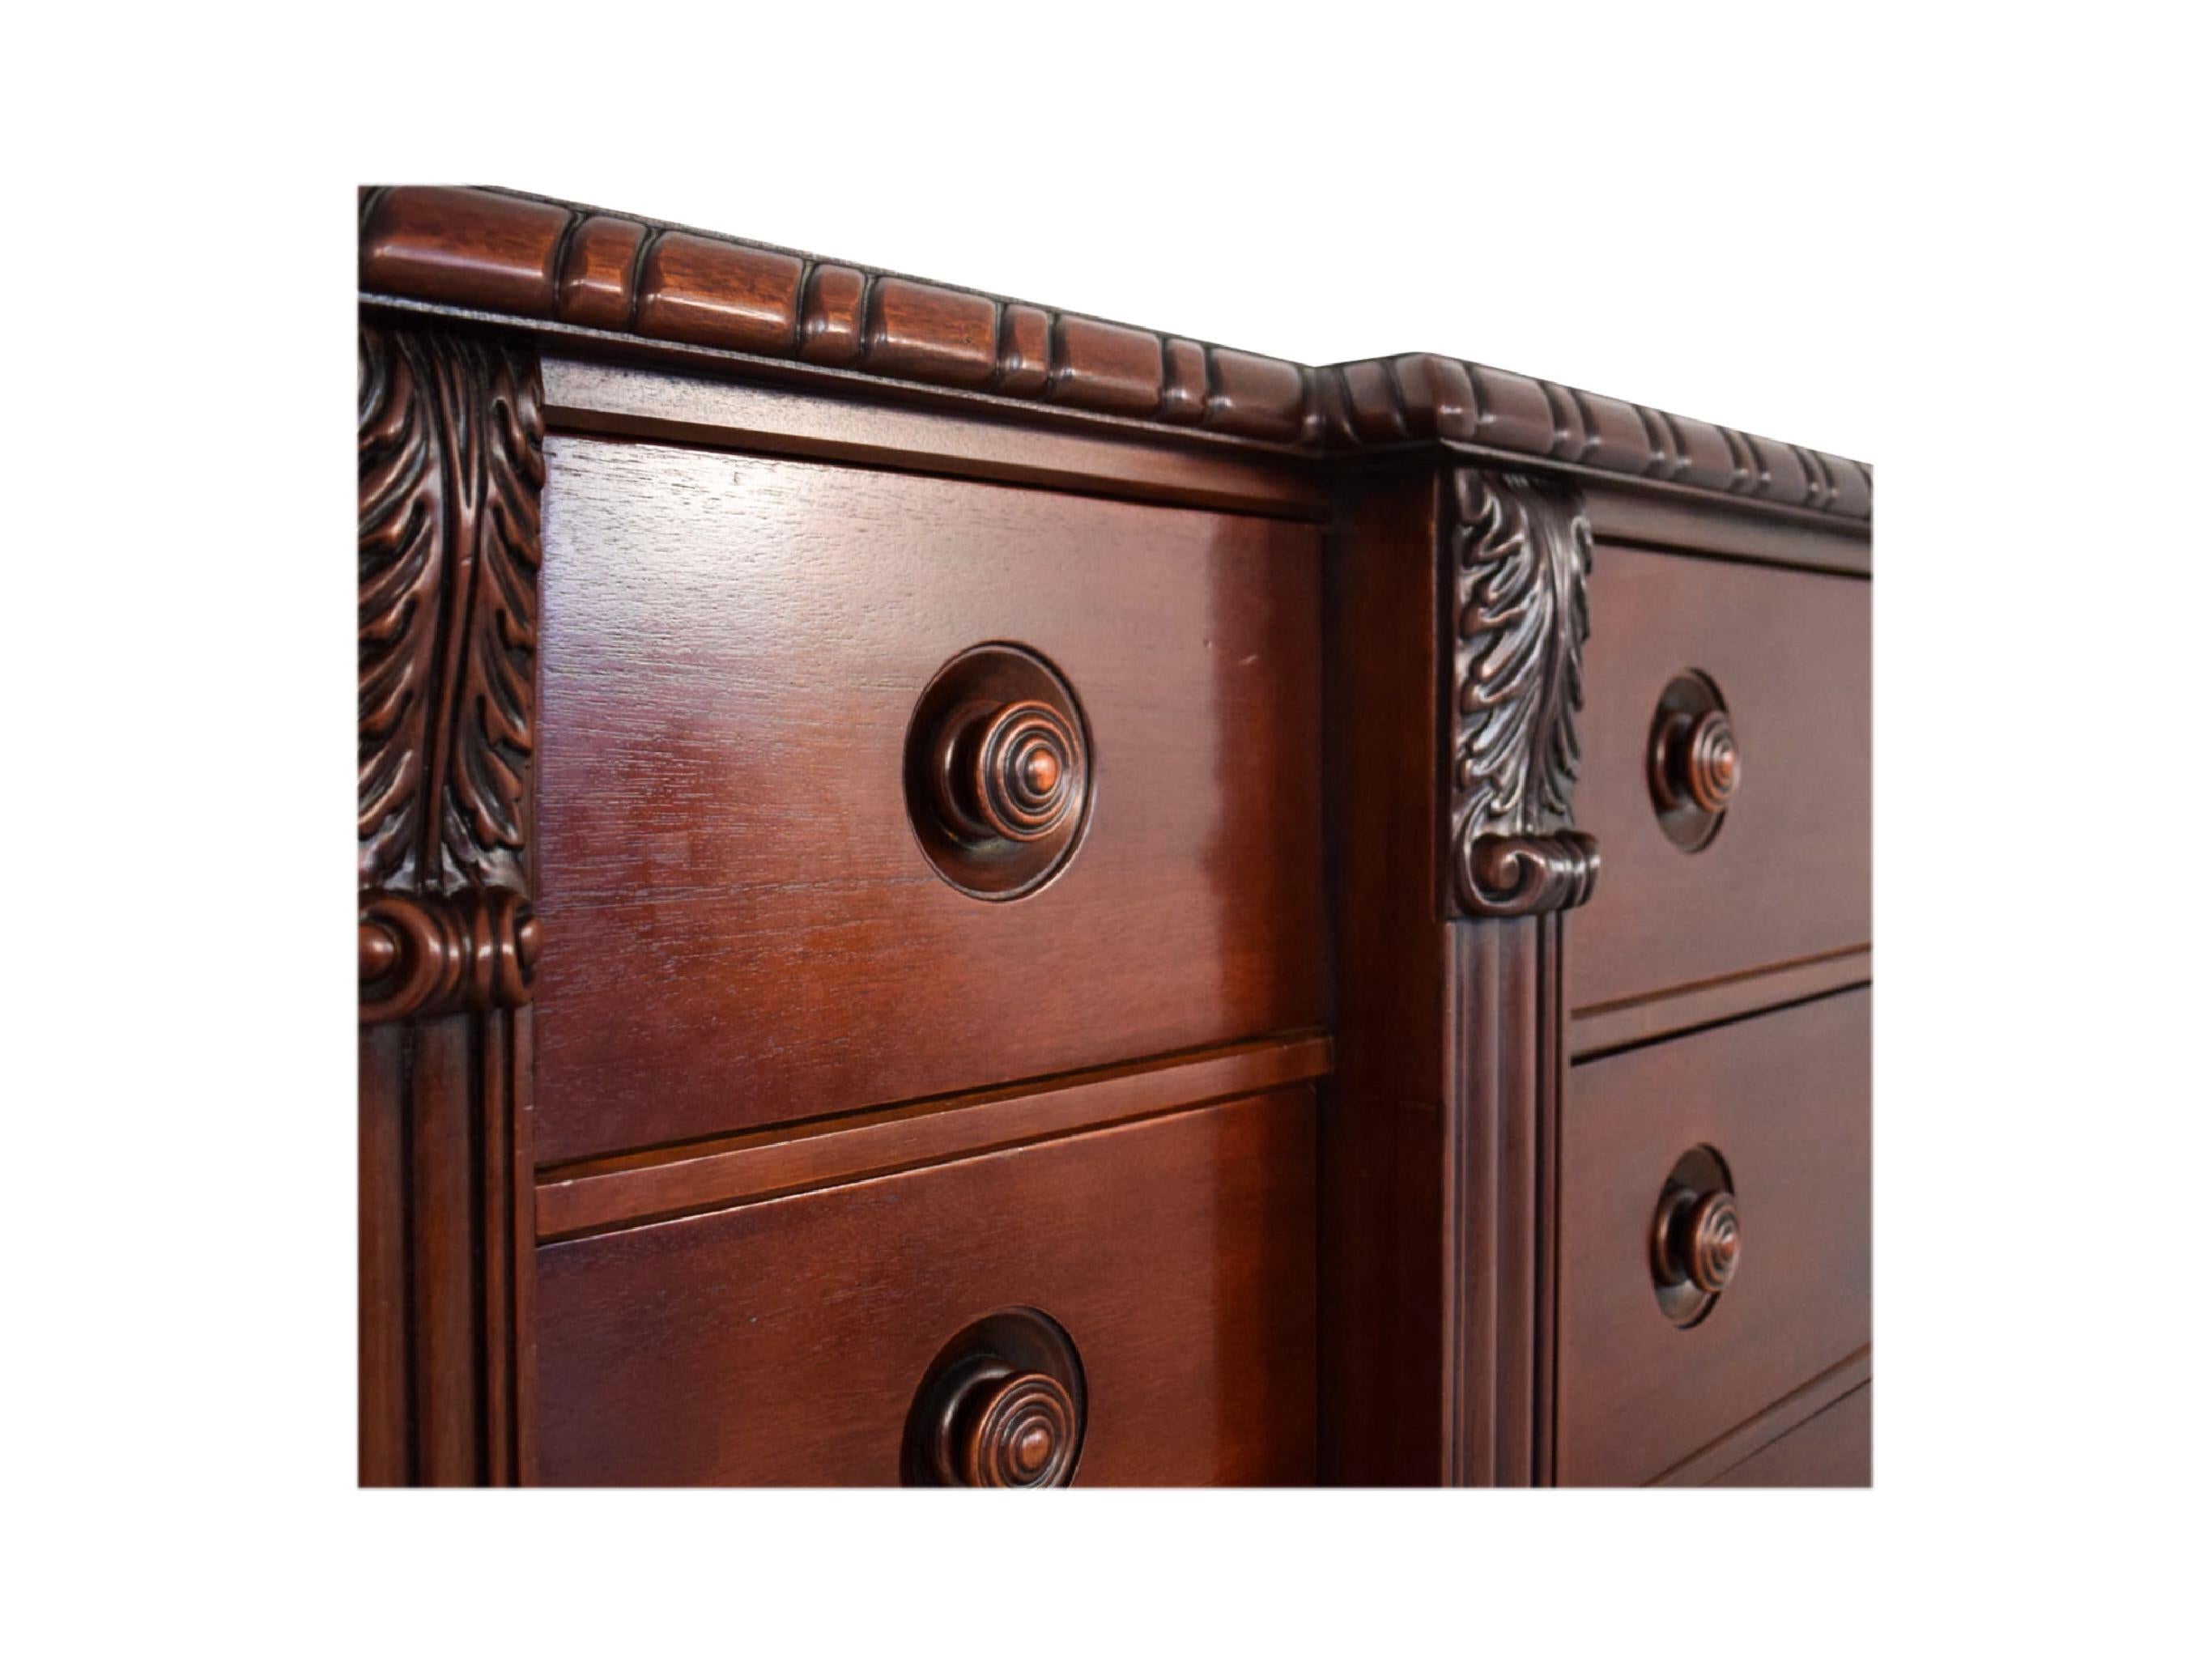 Neoclassical Revival Ralph Lauren Neoclassical Mahogany Gentleperson’s Chest of Drawers Dresser 1990s